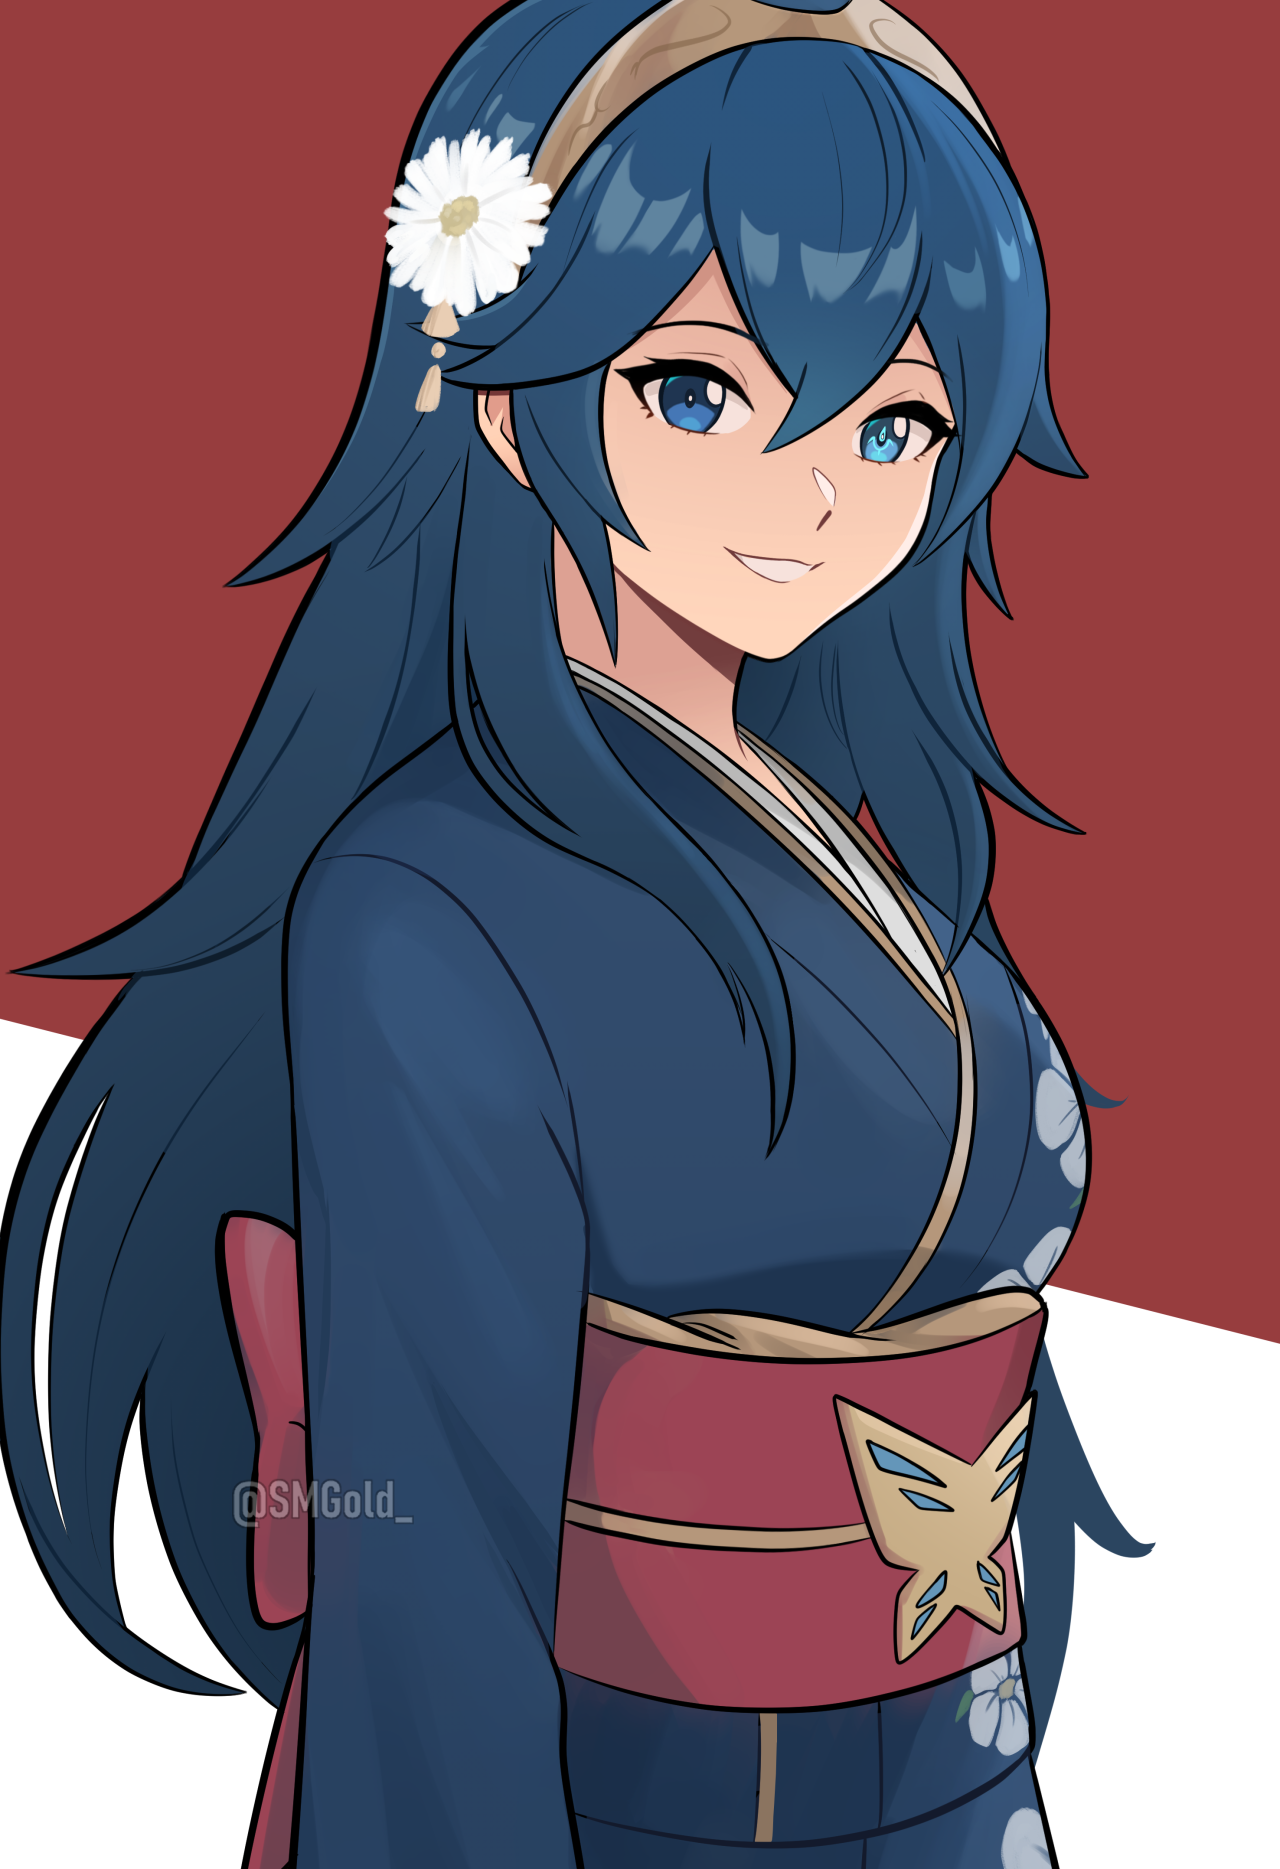 SMGold — Last Lucina of 2022